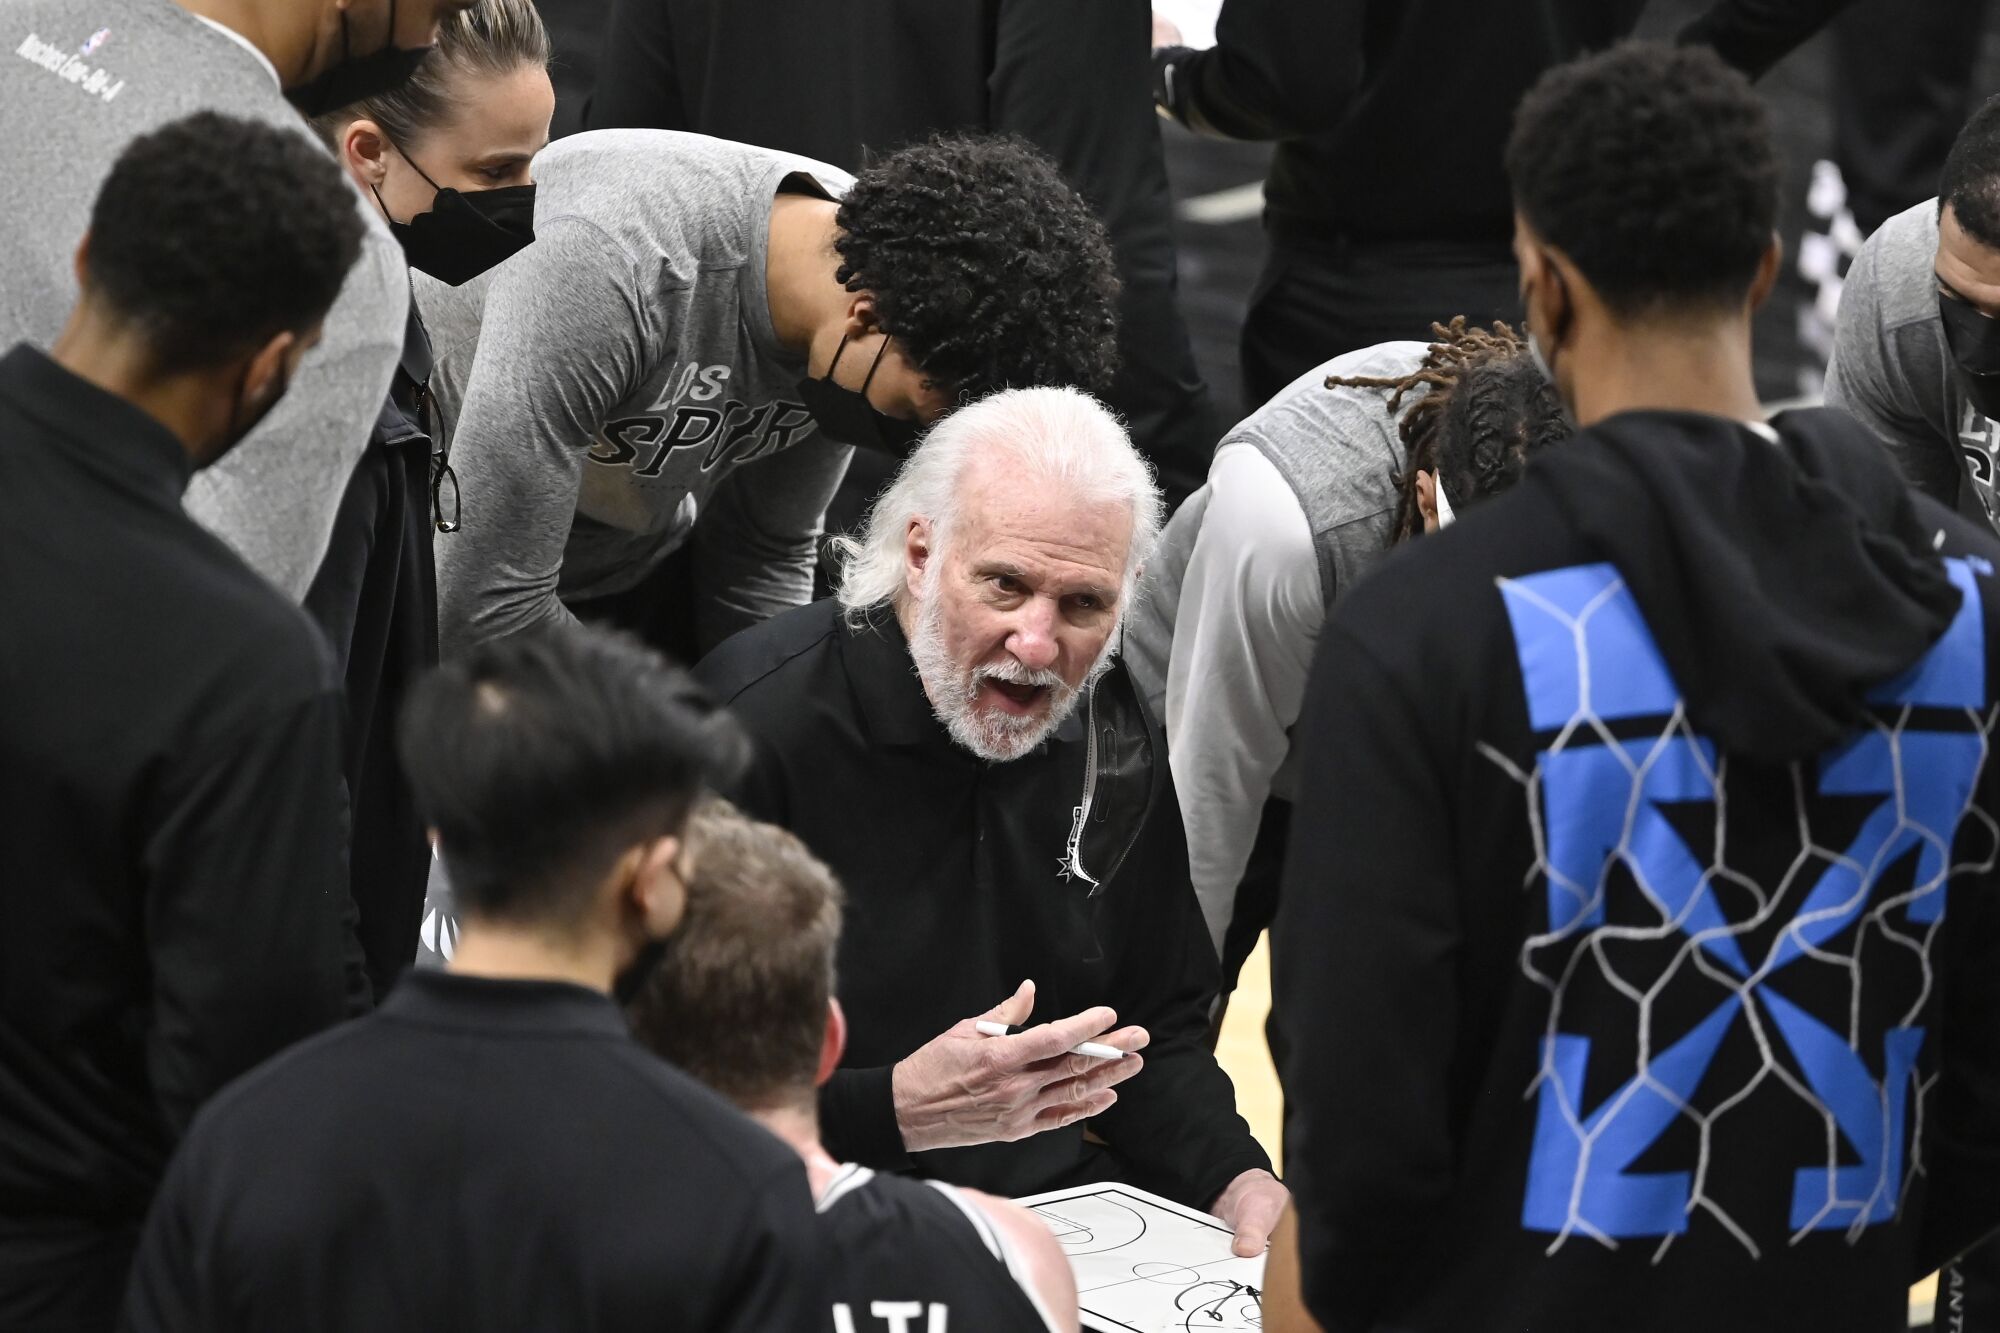 San Antonio Spurs head coach Gregg Popovich talks to his players during a game against the Charlotte Hornets on March 22.